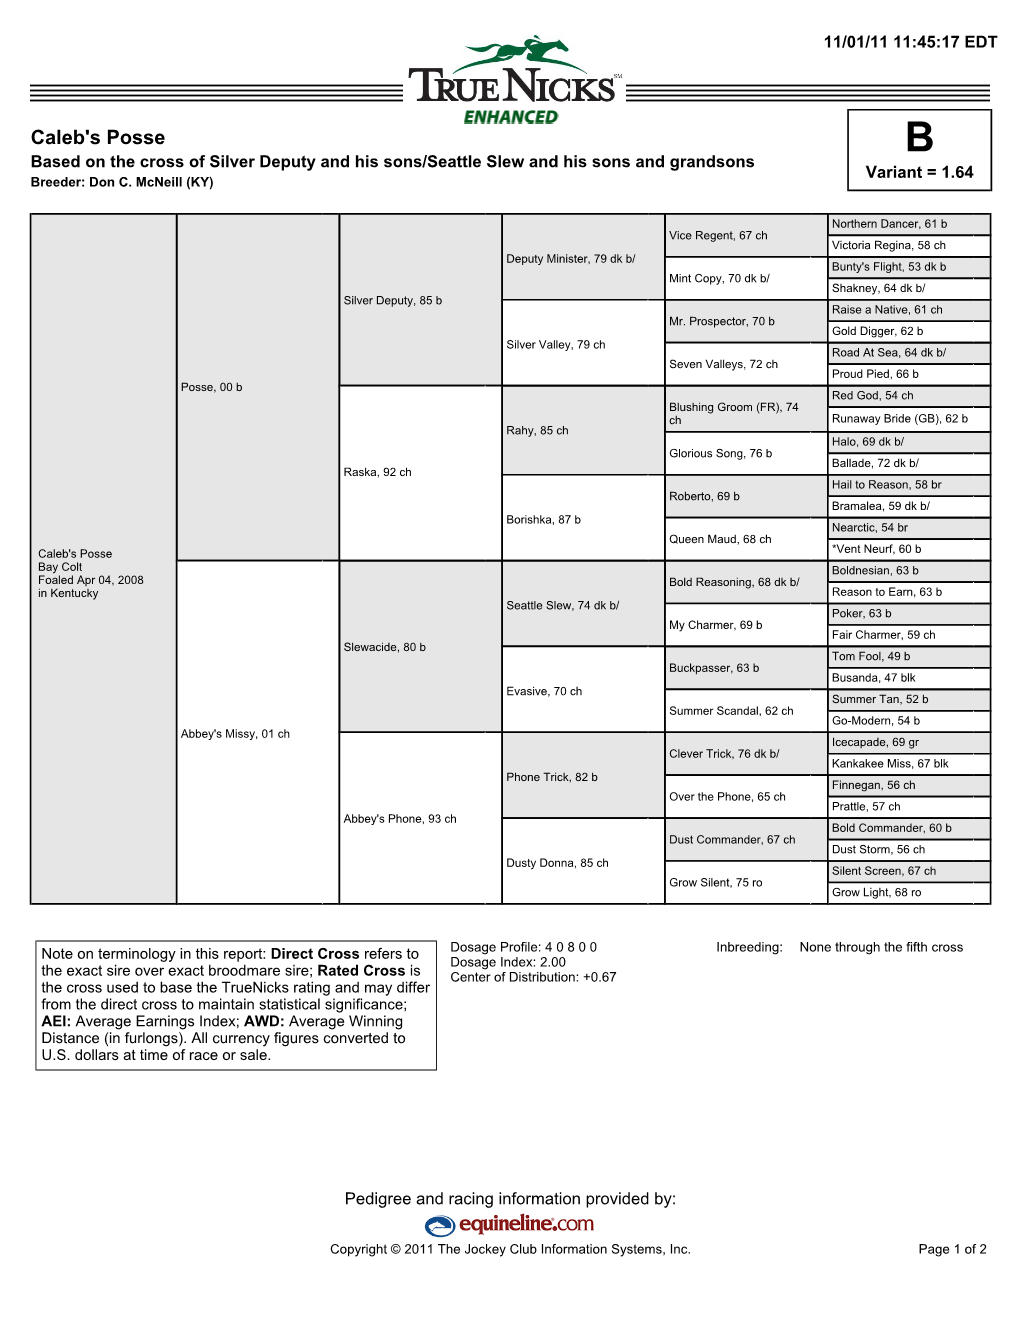 Caleb's Posse B Based on the Cross of Silver Deputy and His Sons/Seattle Slew and His Sons and Grandsons Variant = 1.64 Breeder: Don C